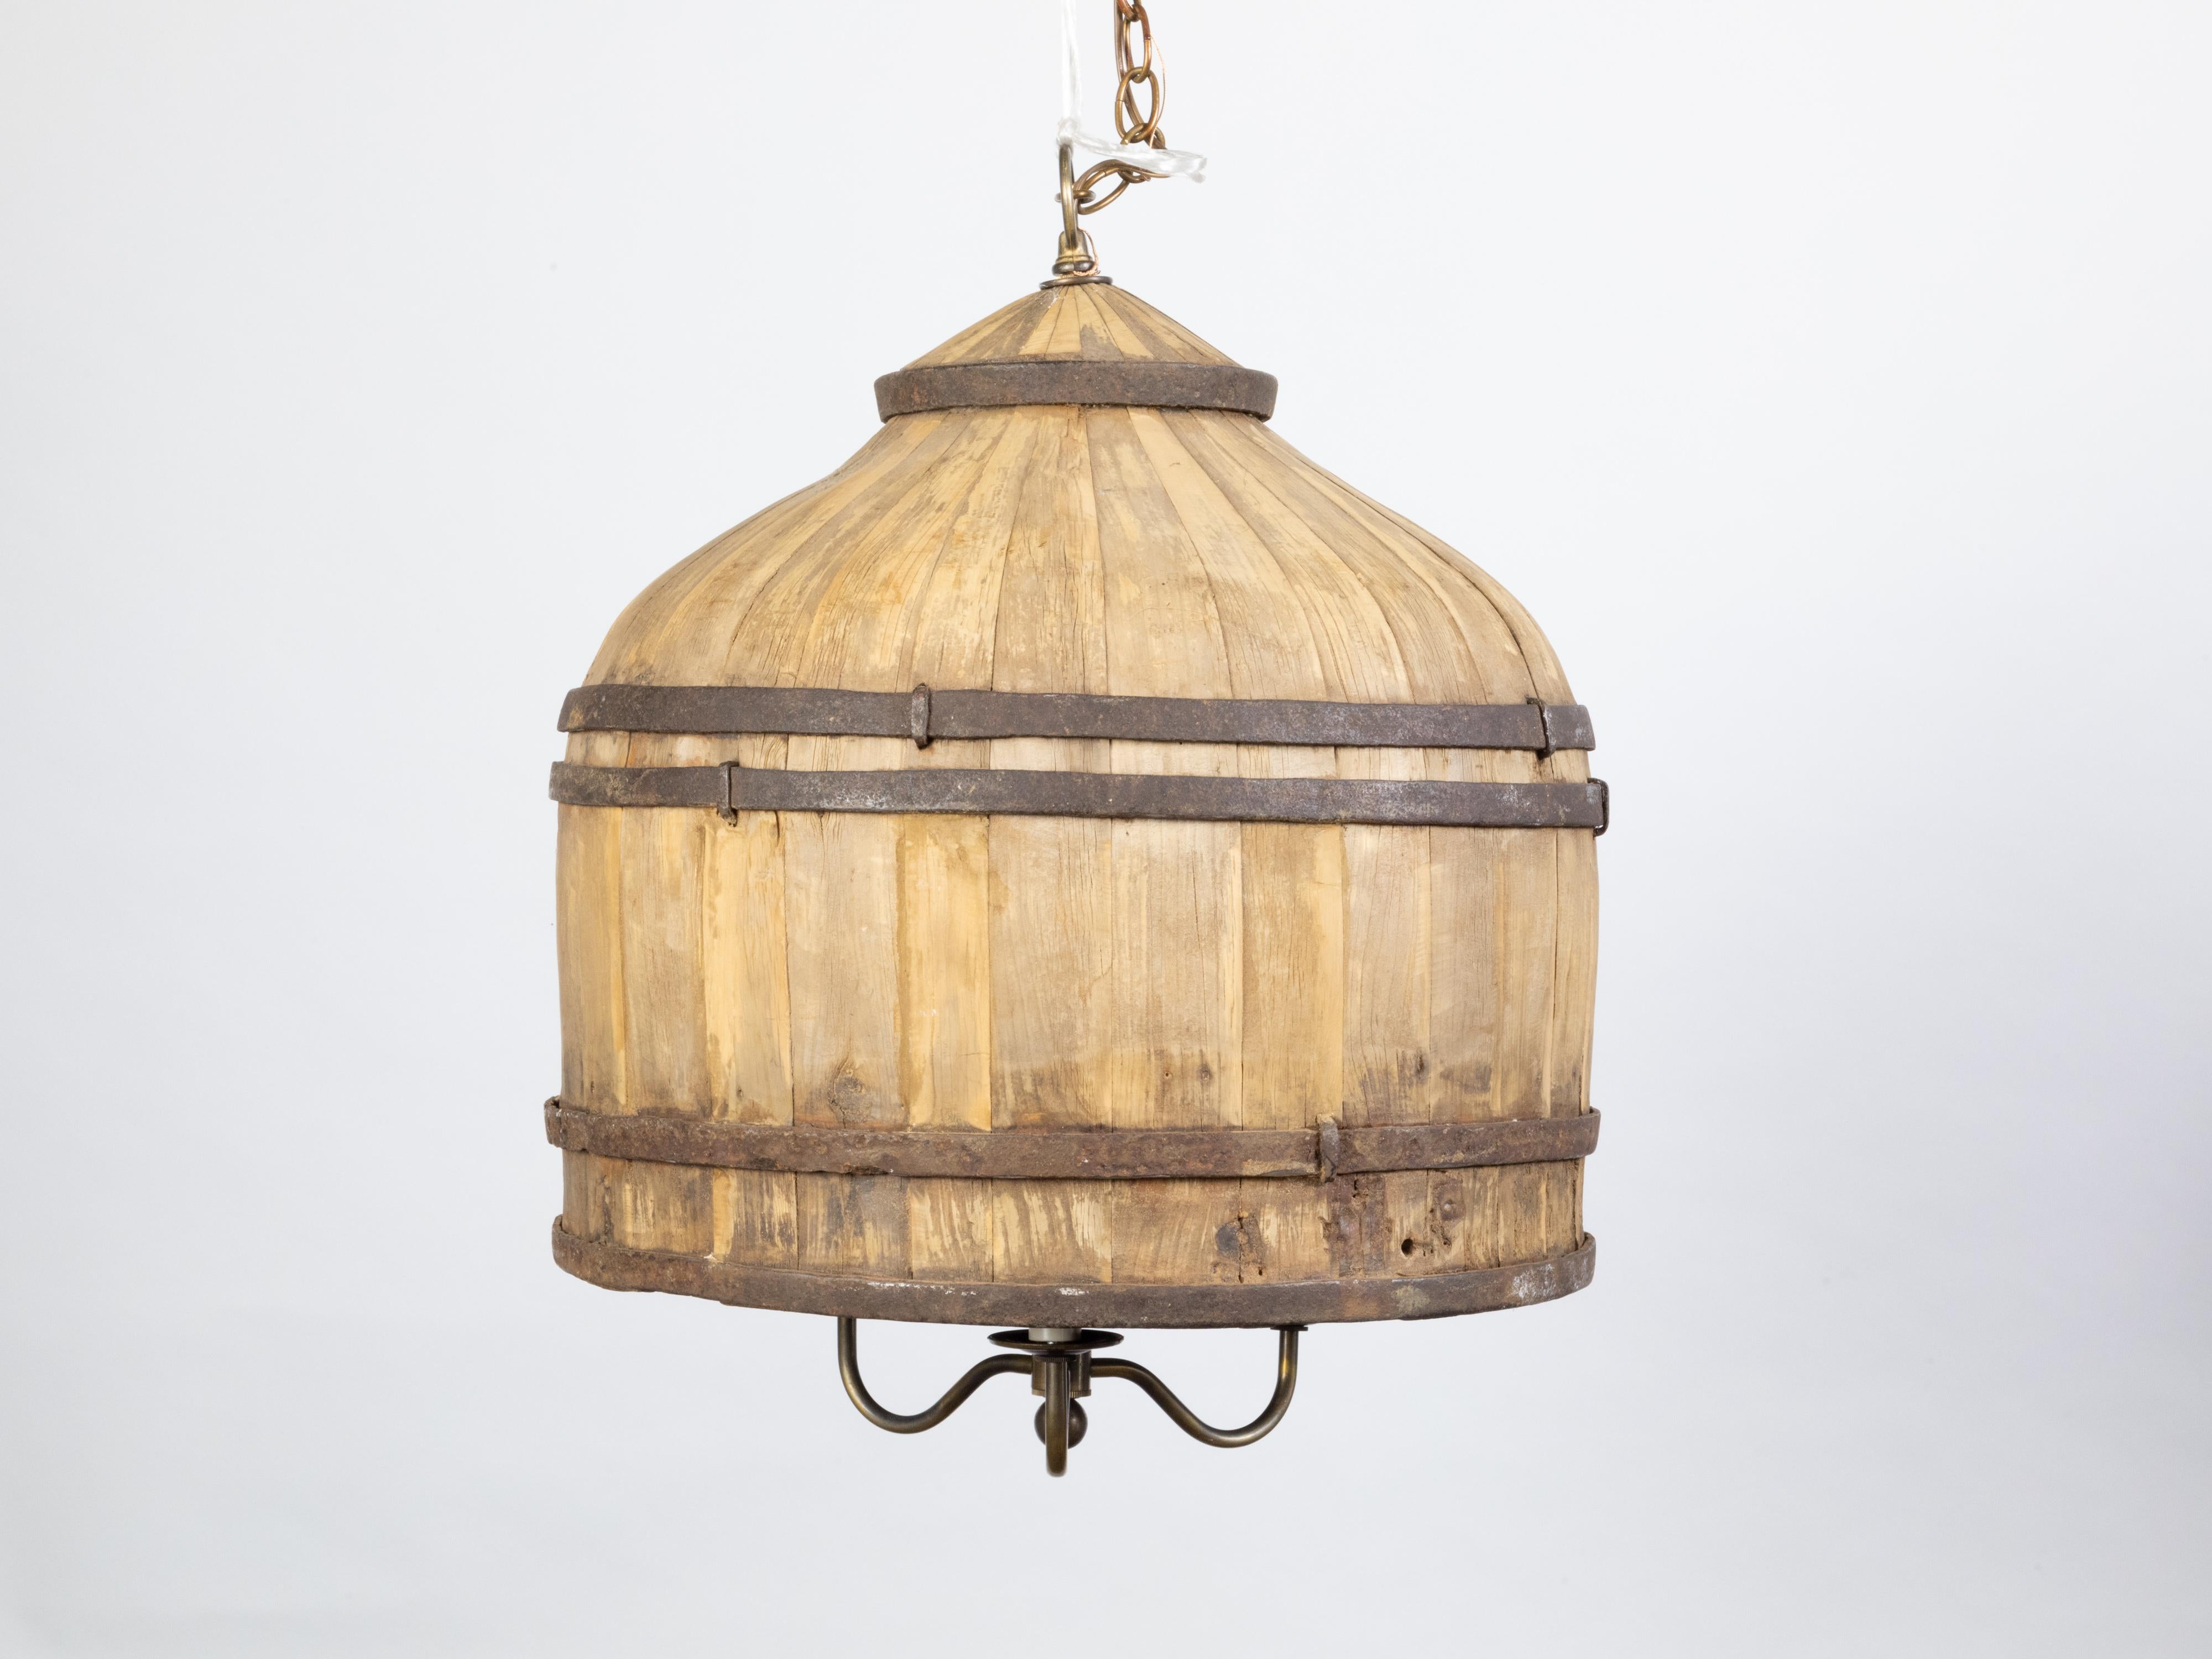 Rustic English Vintage Wooden Barrel Light Fixture with Three Scrolling Arms For Sale 2